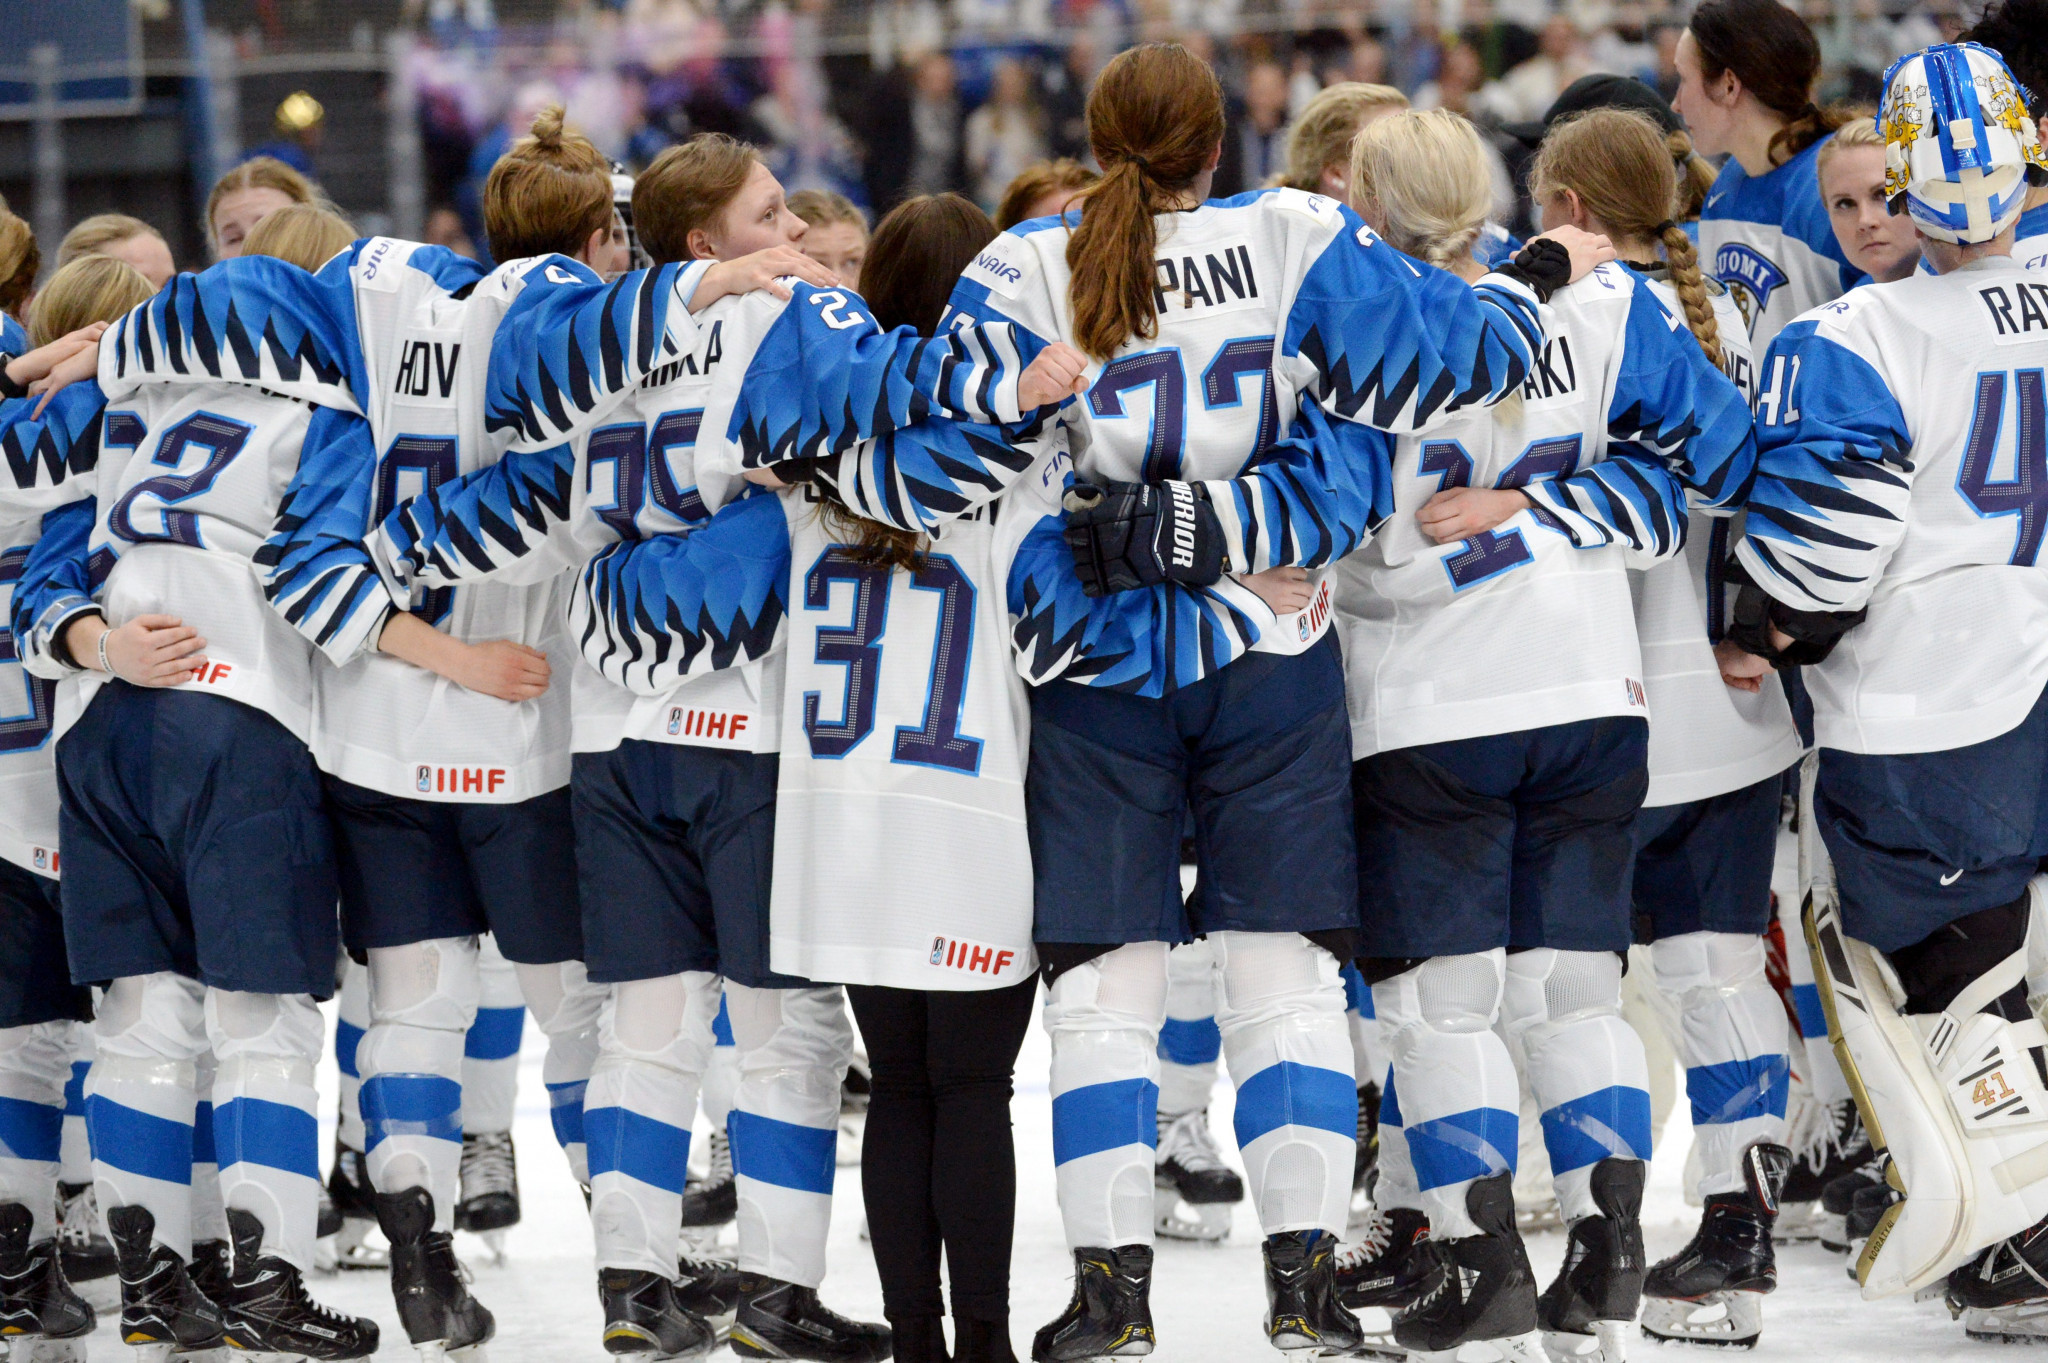 IIHF defend controversial decision to disallow Finland goal in Women’s World Championship final against United States